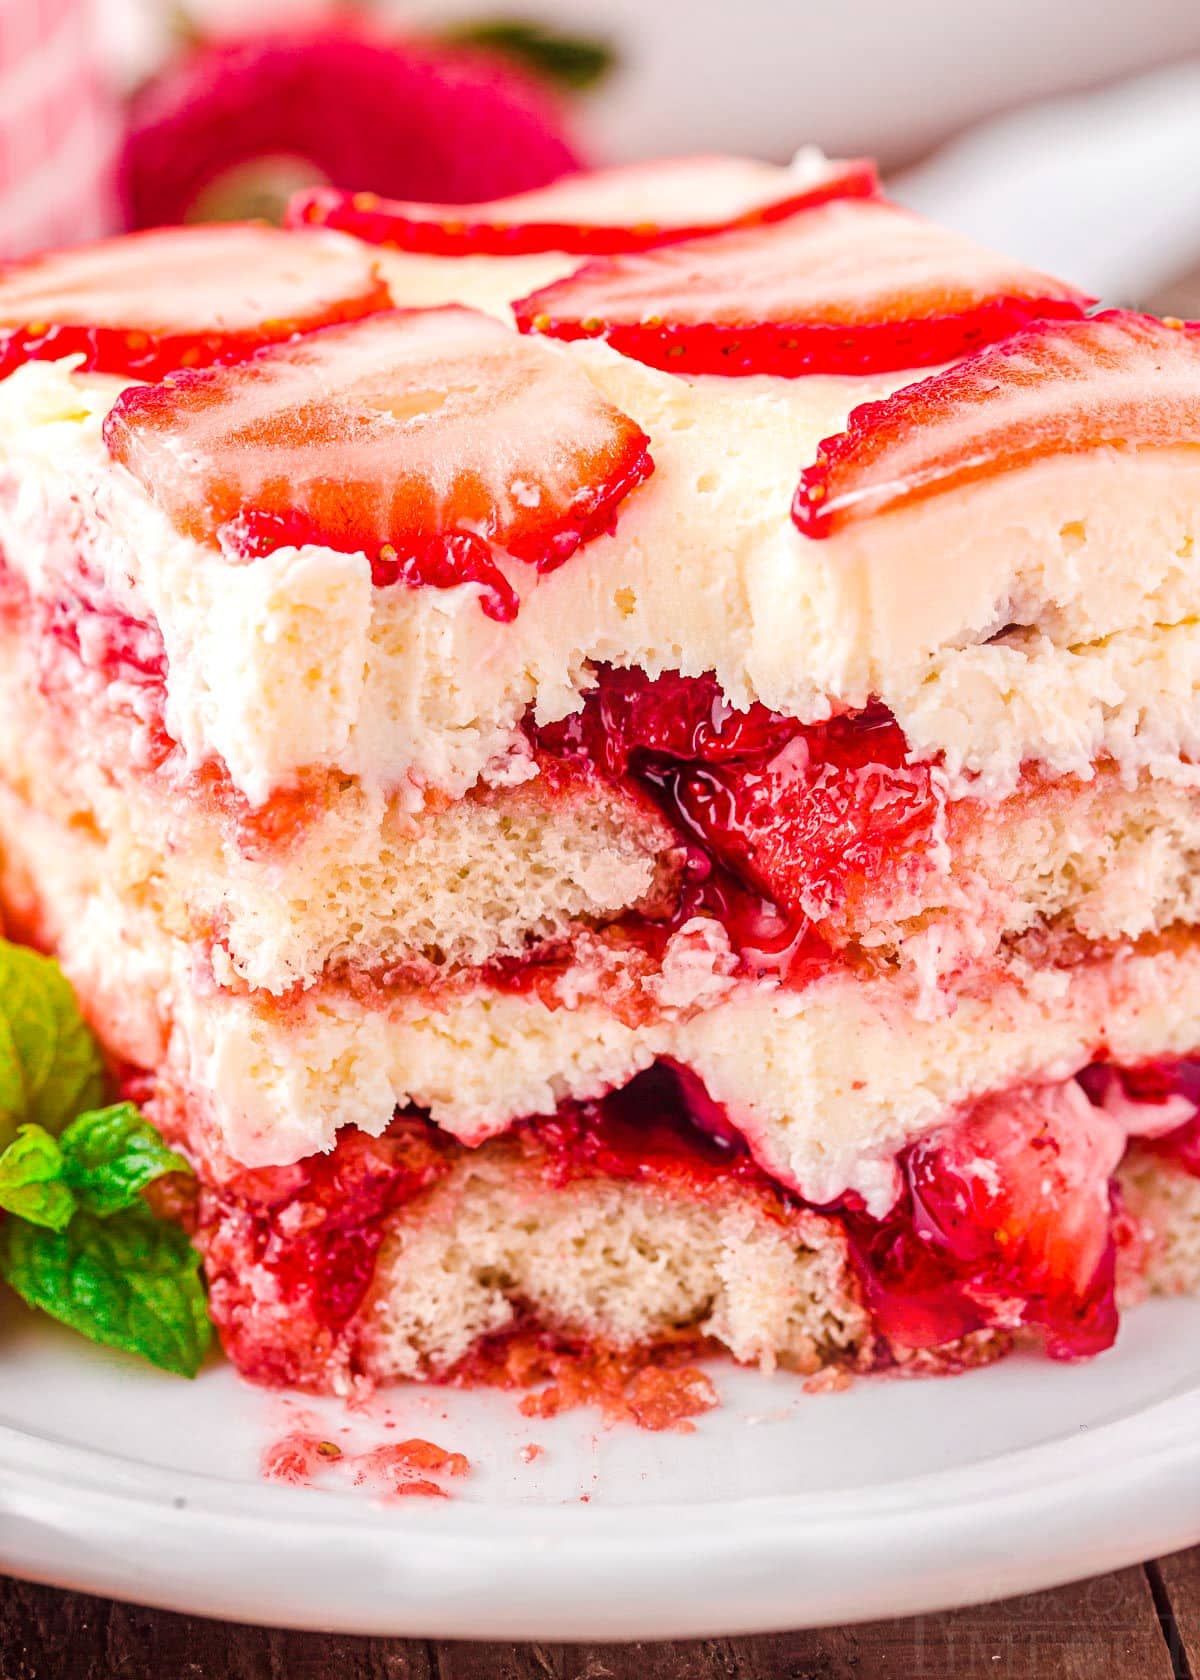 close up look at all of the layers in the strawberry tiramisu after a forkful has been removed.